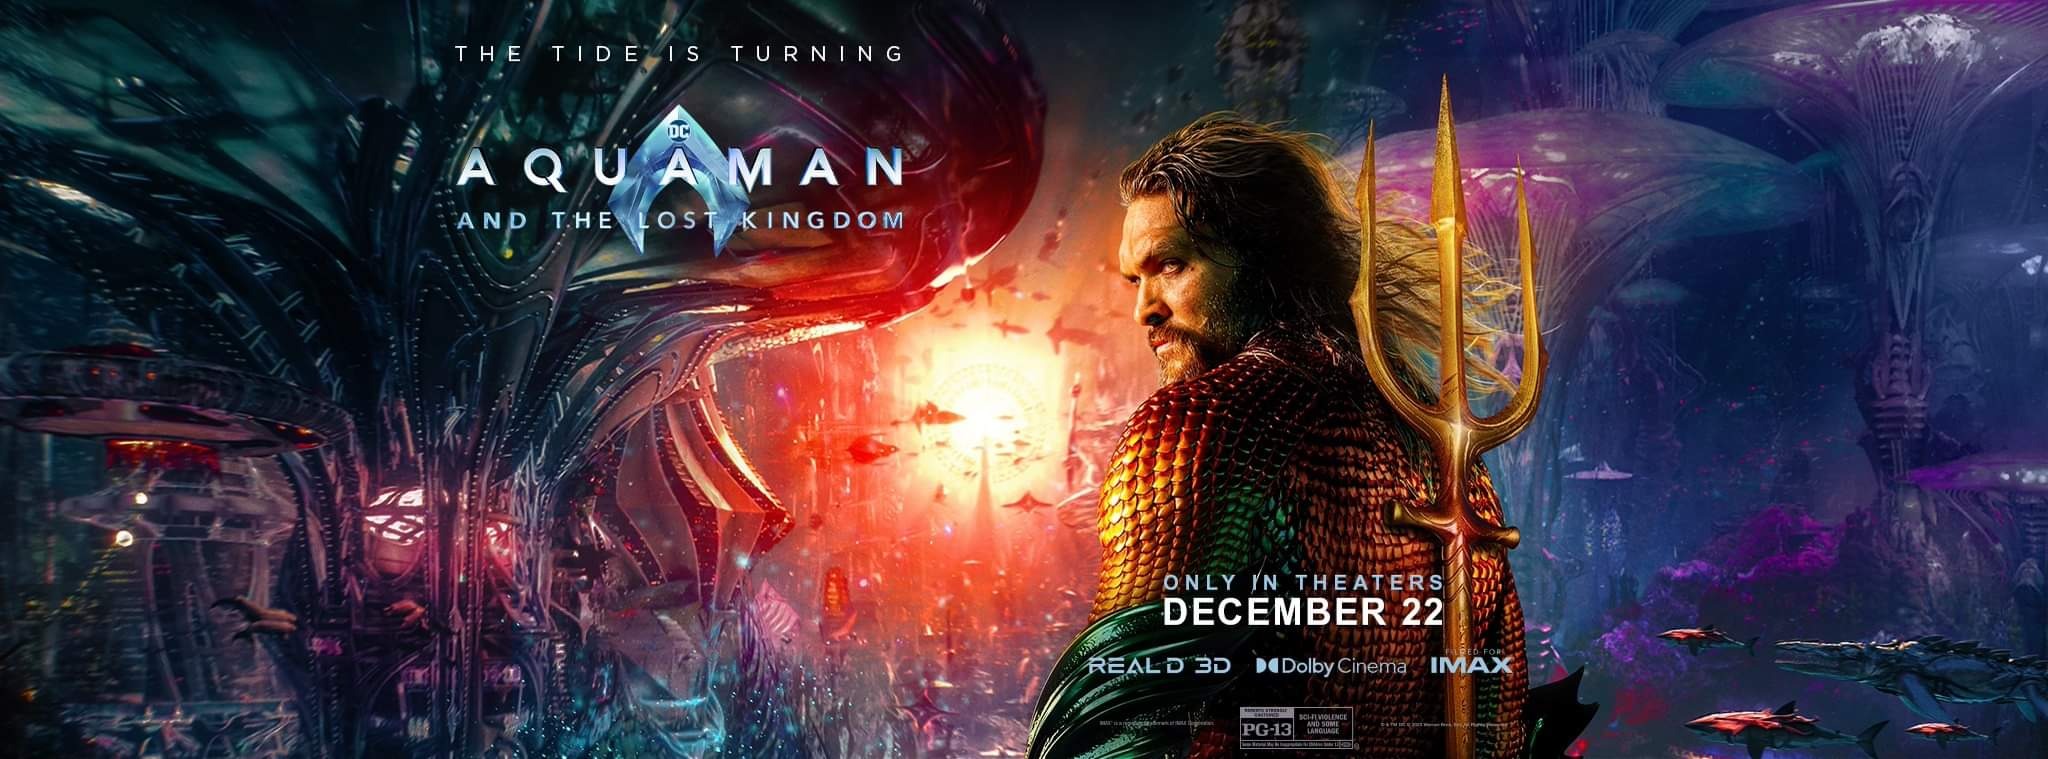 Mega Sized Movie Poster Image for Aquaman and the Lost Kingdom (#4 of 19)